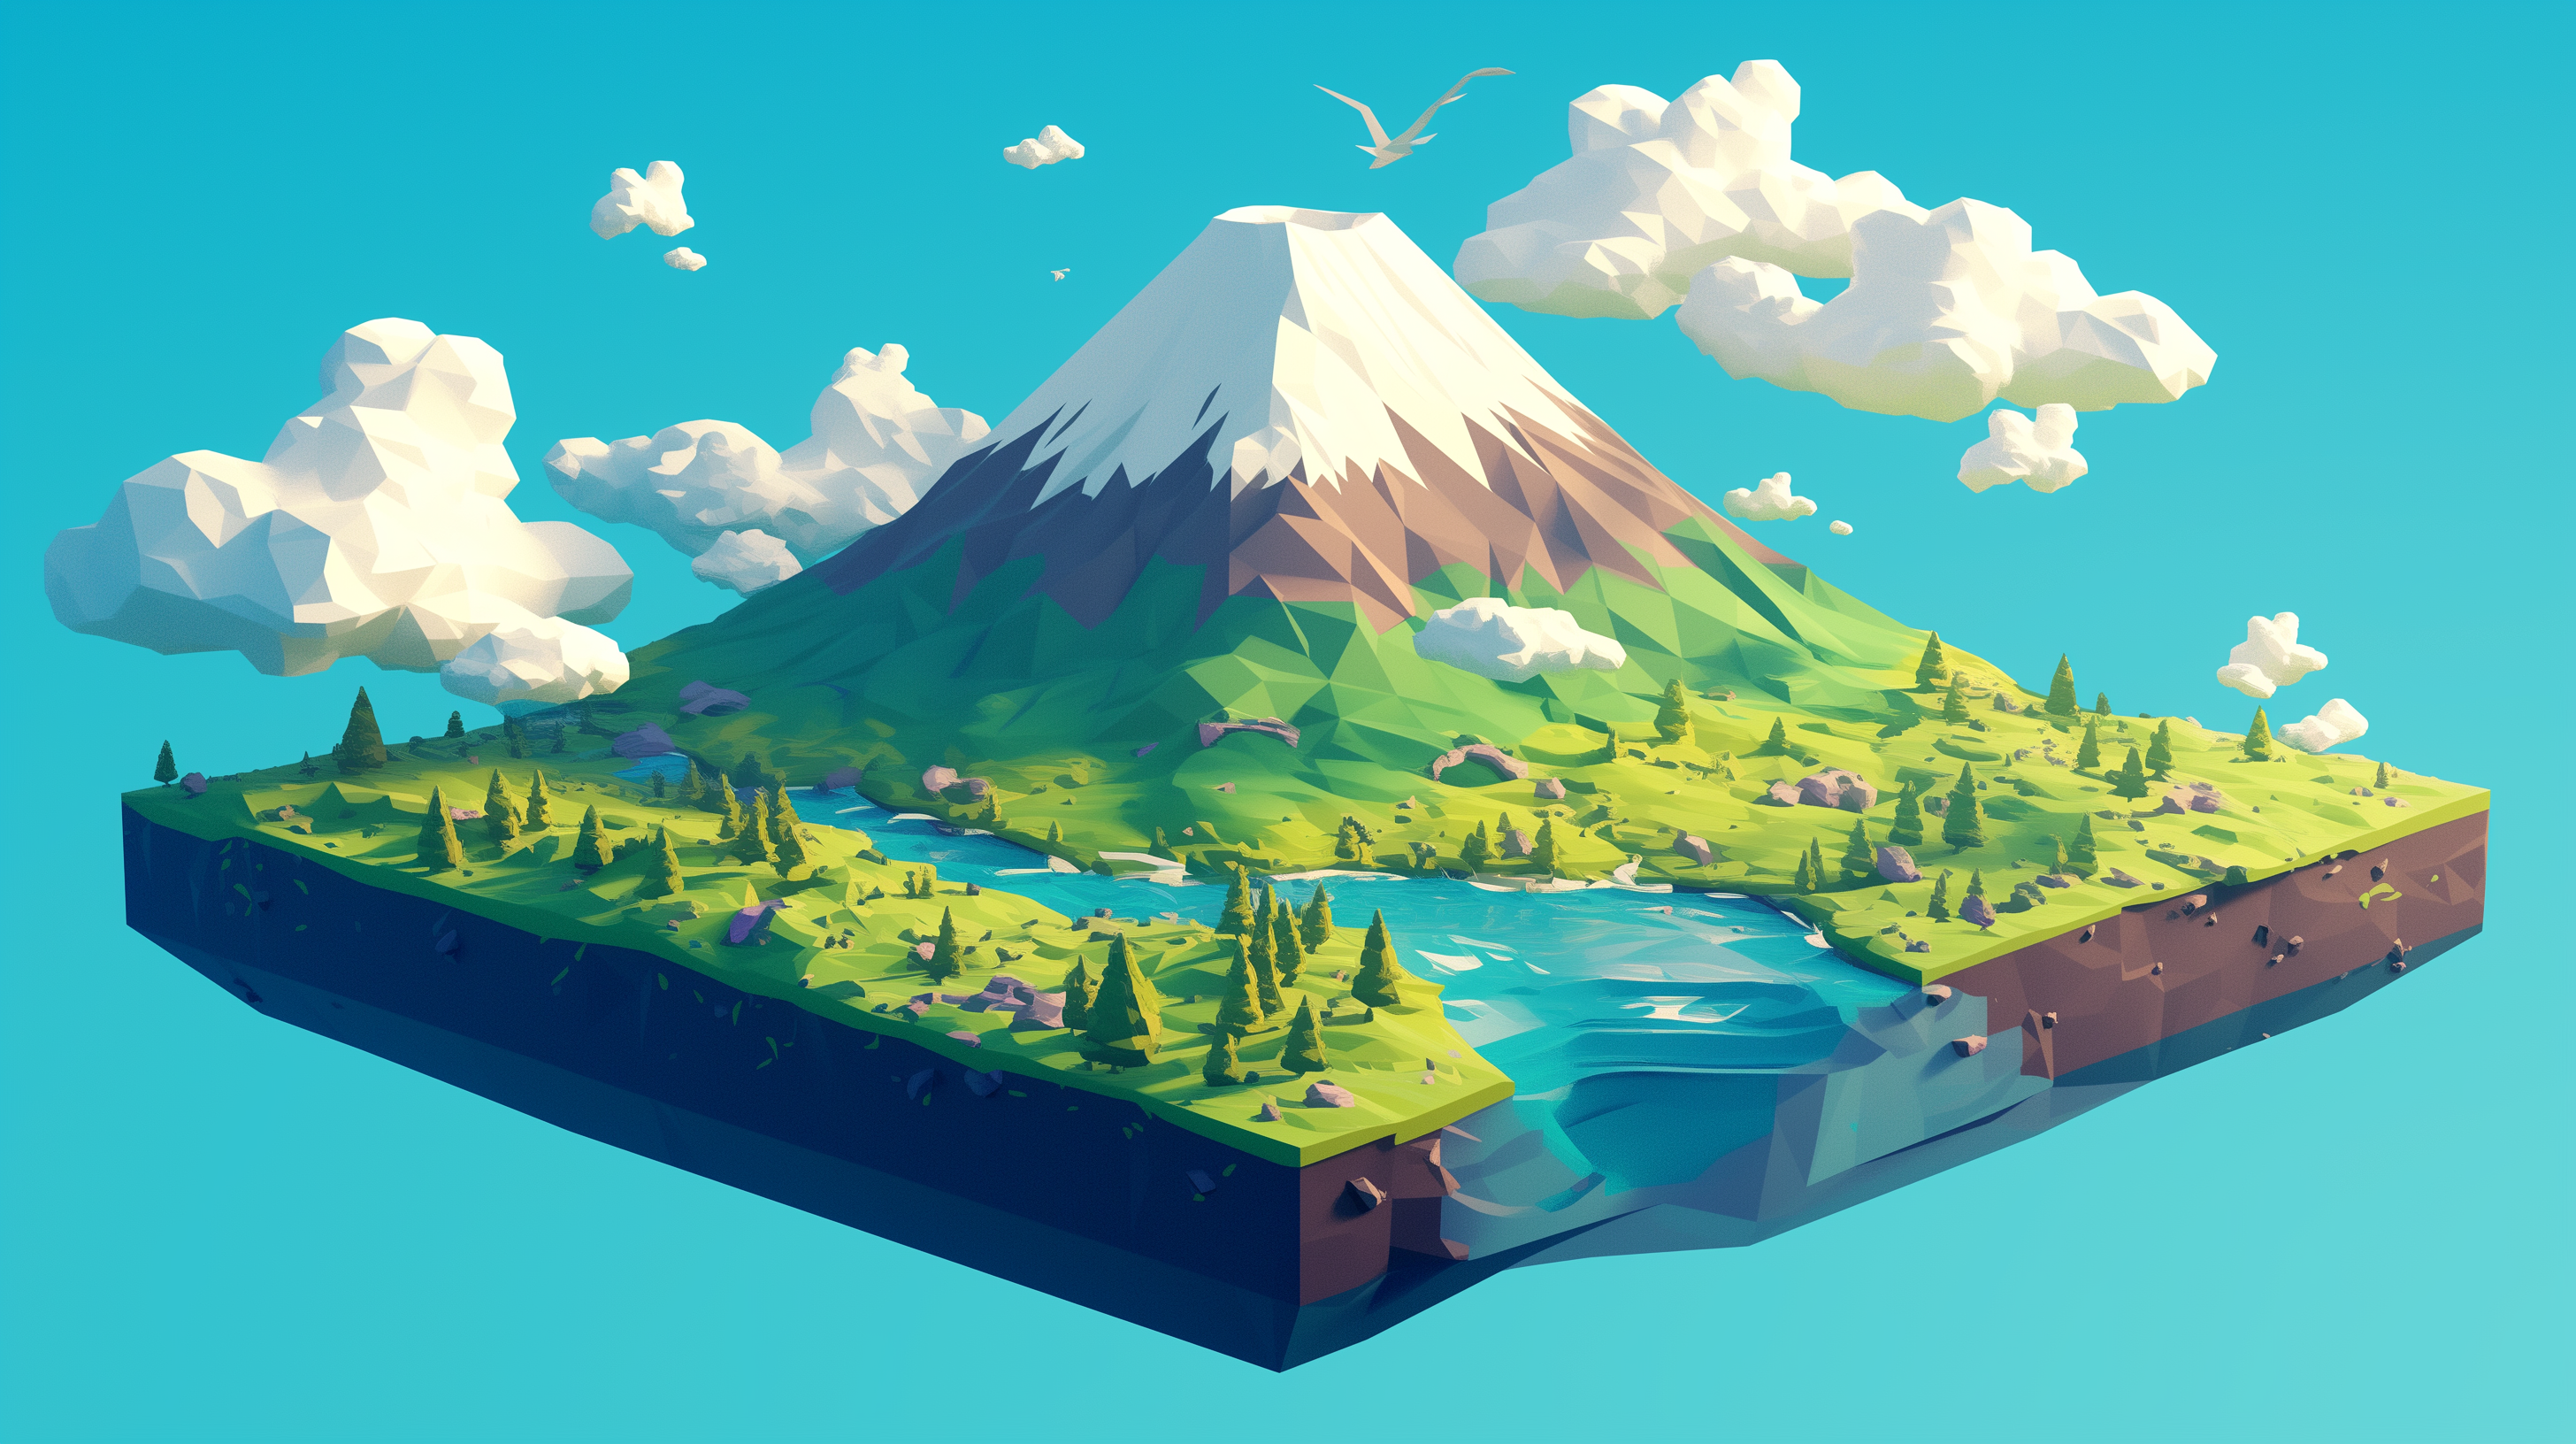 Isometric illustration of Mount Fuji in Japan with lush landscape for an HD desktop wallpaper.